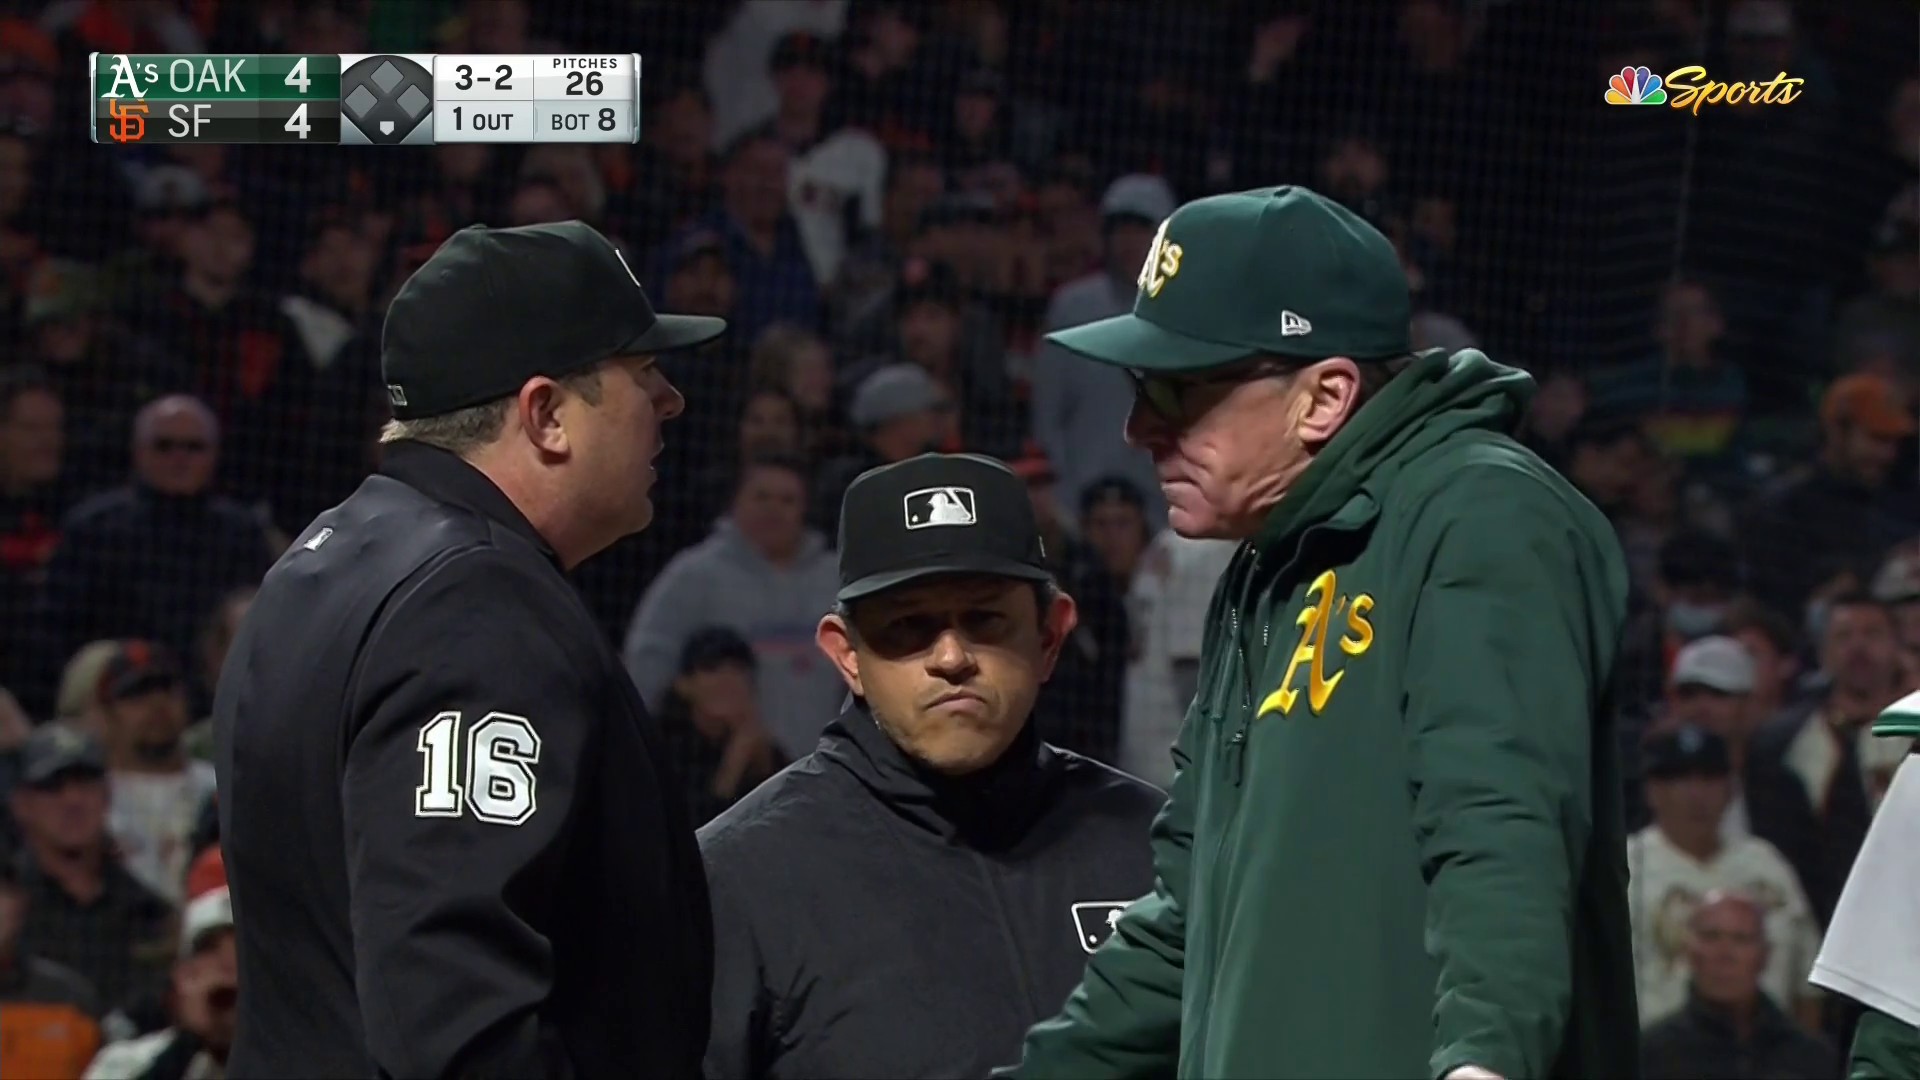 Highlight] Bruce Bochy is tossed from the game after the call on